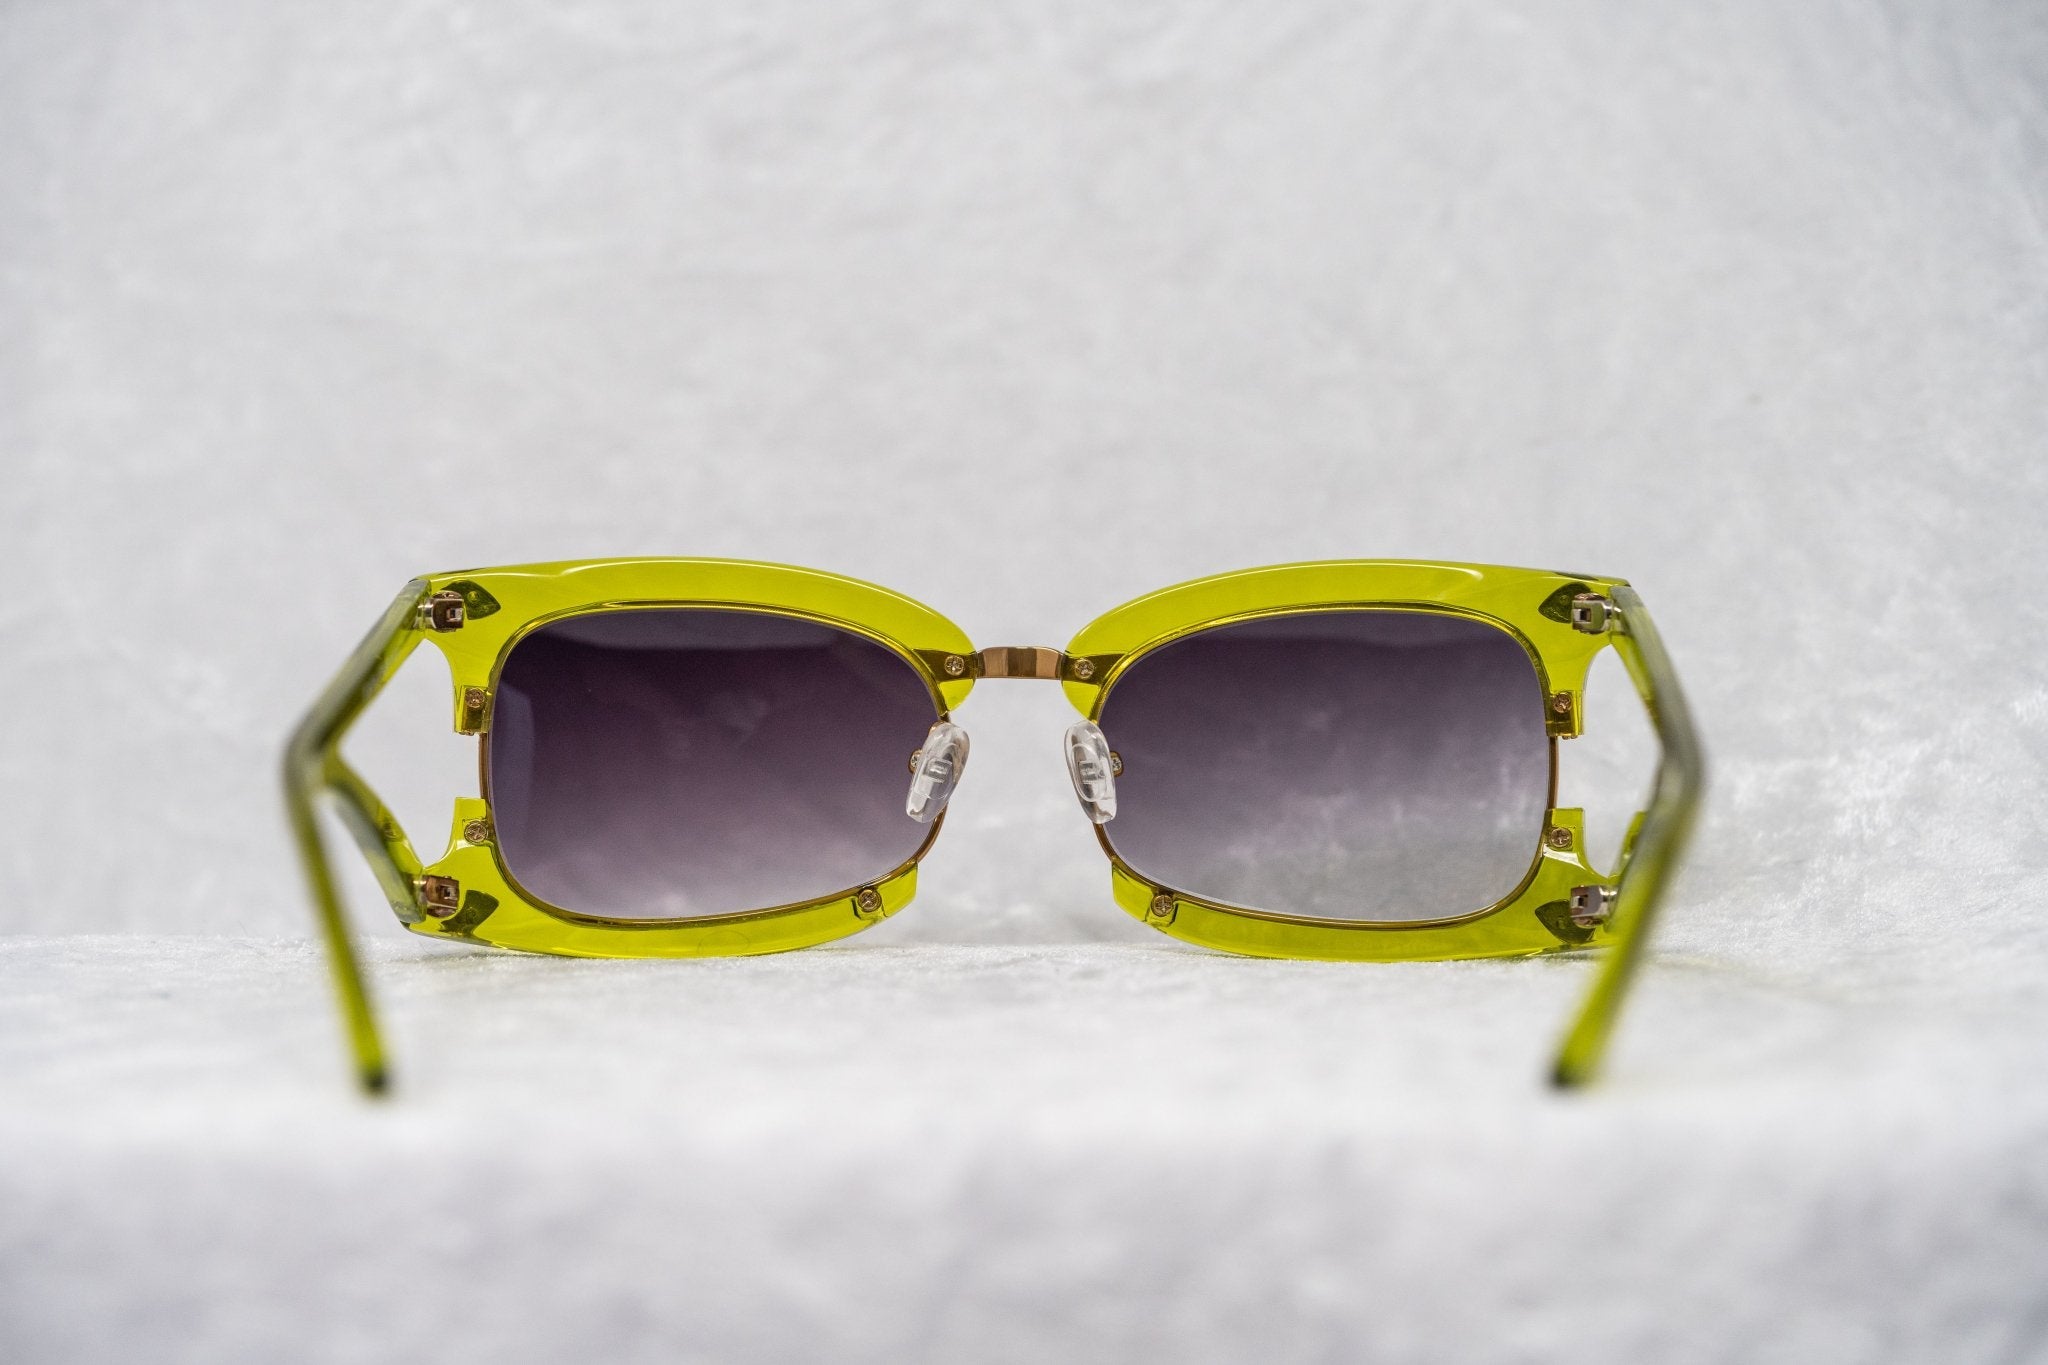 Prabal Gurung Sunglasses Rectangular Apple Green With Purple Category 3 Graduated Lenses PG2C4SUN - Watches & Crystals